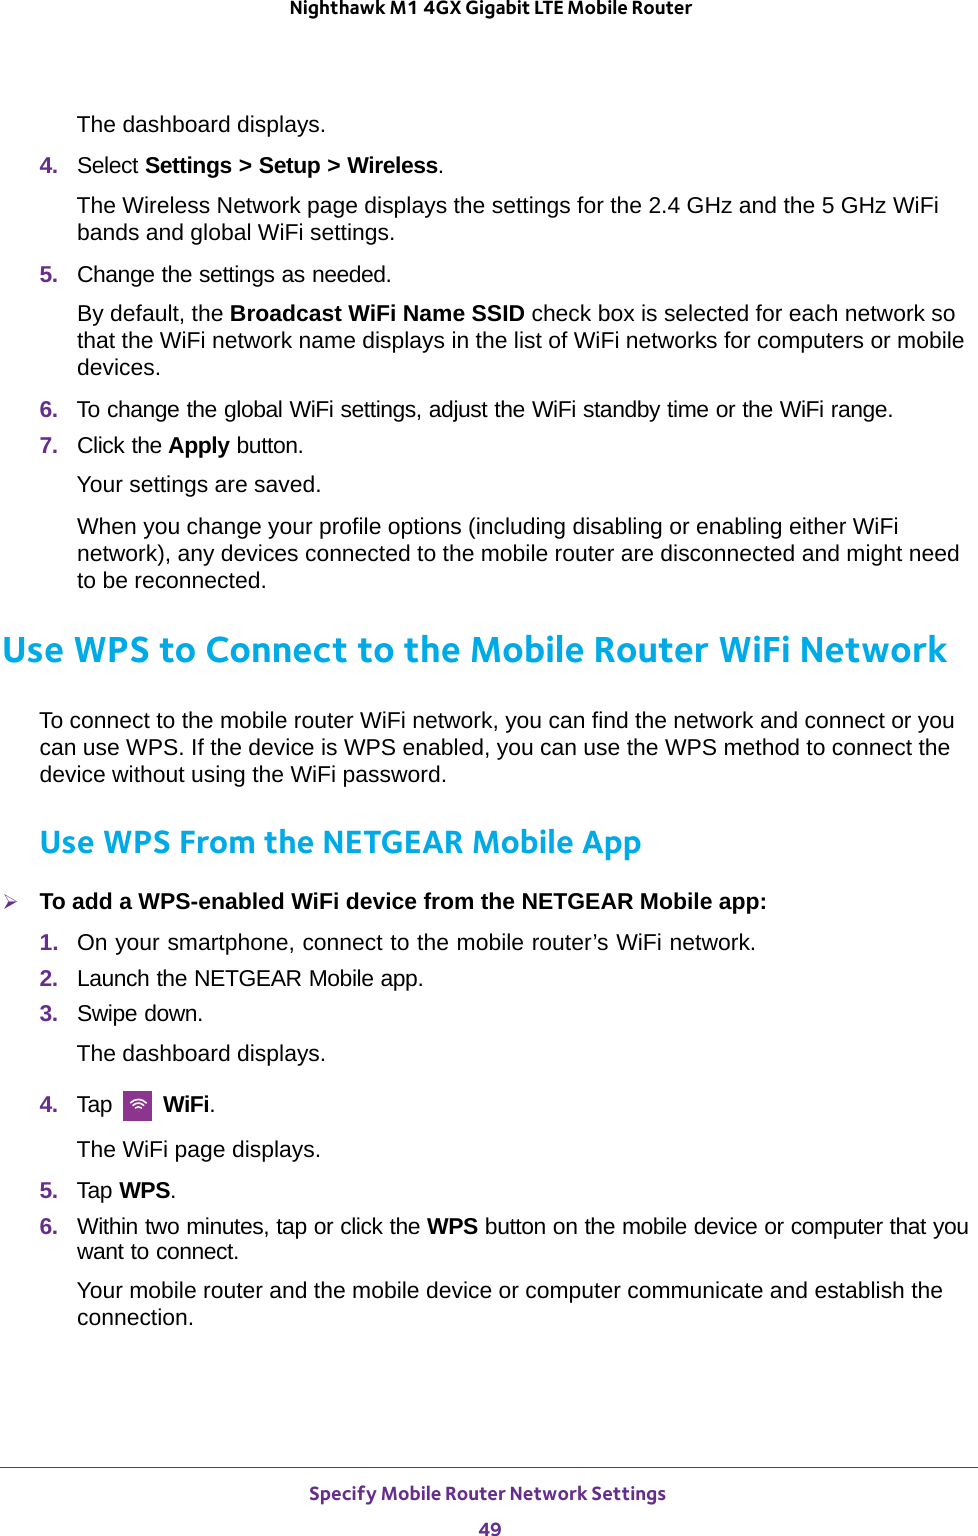 Specify Mobile Router Network Settings 49 Nighthawk M1 4GX Gigabit LTE Mobile RouterThe dashboard displays.4.  Select Settings &gt; Setup &gt; Wireless.The Wireless Network page displays the settings for the 2.4 GHz and the 5 GHz WiFi bands and global WiFi settings.5.  Change the settings as needed.By default, the Broadcast WiFi Name SSID check box is selected for each network so that the WiFi network name displays in the list of WiFi networks for computers or mobile devices. 6.  To change the global WiFi settings, adjust the WiFi standby time or the WiFi range.7.  Click the Apply button.Your settings are saved.When you change your profile options (including disabling or enabling either WiFi network), any devices connected to the mobile router are disconnected and might need to be reconnected.Use WPS to Connect to the Mobile Router WiFi NetworkTo connect to the mobile router WiFi network, you can find the network and connect or you can use WPS. If the device is WPS enabled, you can use the WPS method to connect the device without using the WiFi password. Use WPS From the NETGEAR Mobile AppTo add a WPS-enabled WiFi device from the NETGEAR Mobile app:1.  On your smartphone, connect to the mobile router’s WiFi network.2.  Launch the NETGEAR Mobile app.3.  Swipe down.The dashboard displays.4.  Tap   WiFi.The WiFi page displays.5.  Tap WPS.6.  Within two minutes, tap or click the WPS button on the mobile device or computer that you want to connect.Your mobile router and the mobile device or computer communicate and establish the connection.